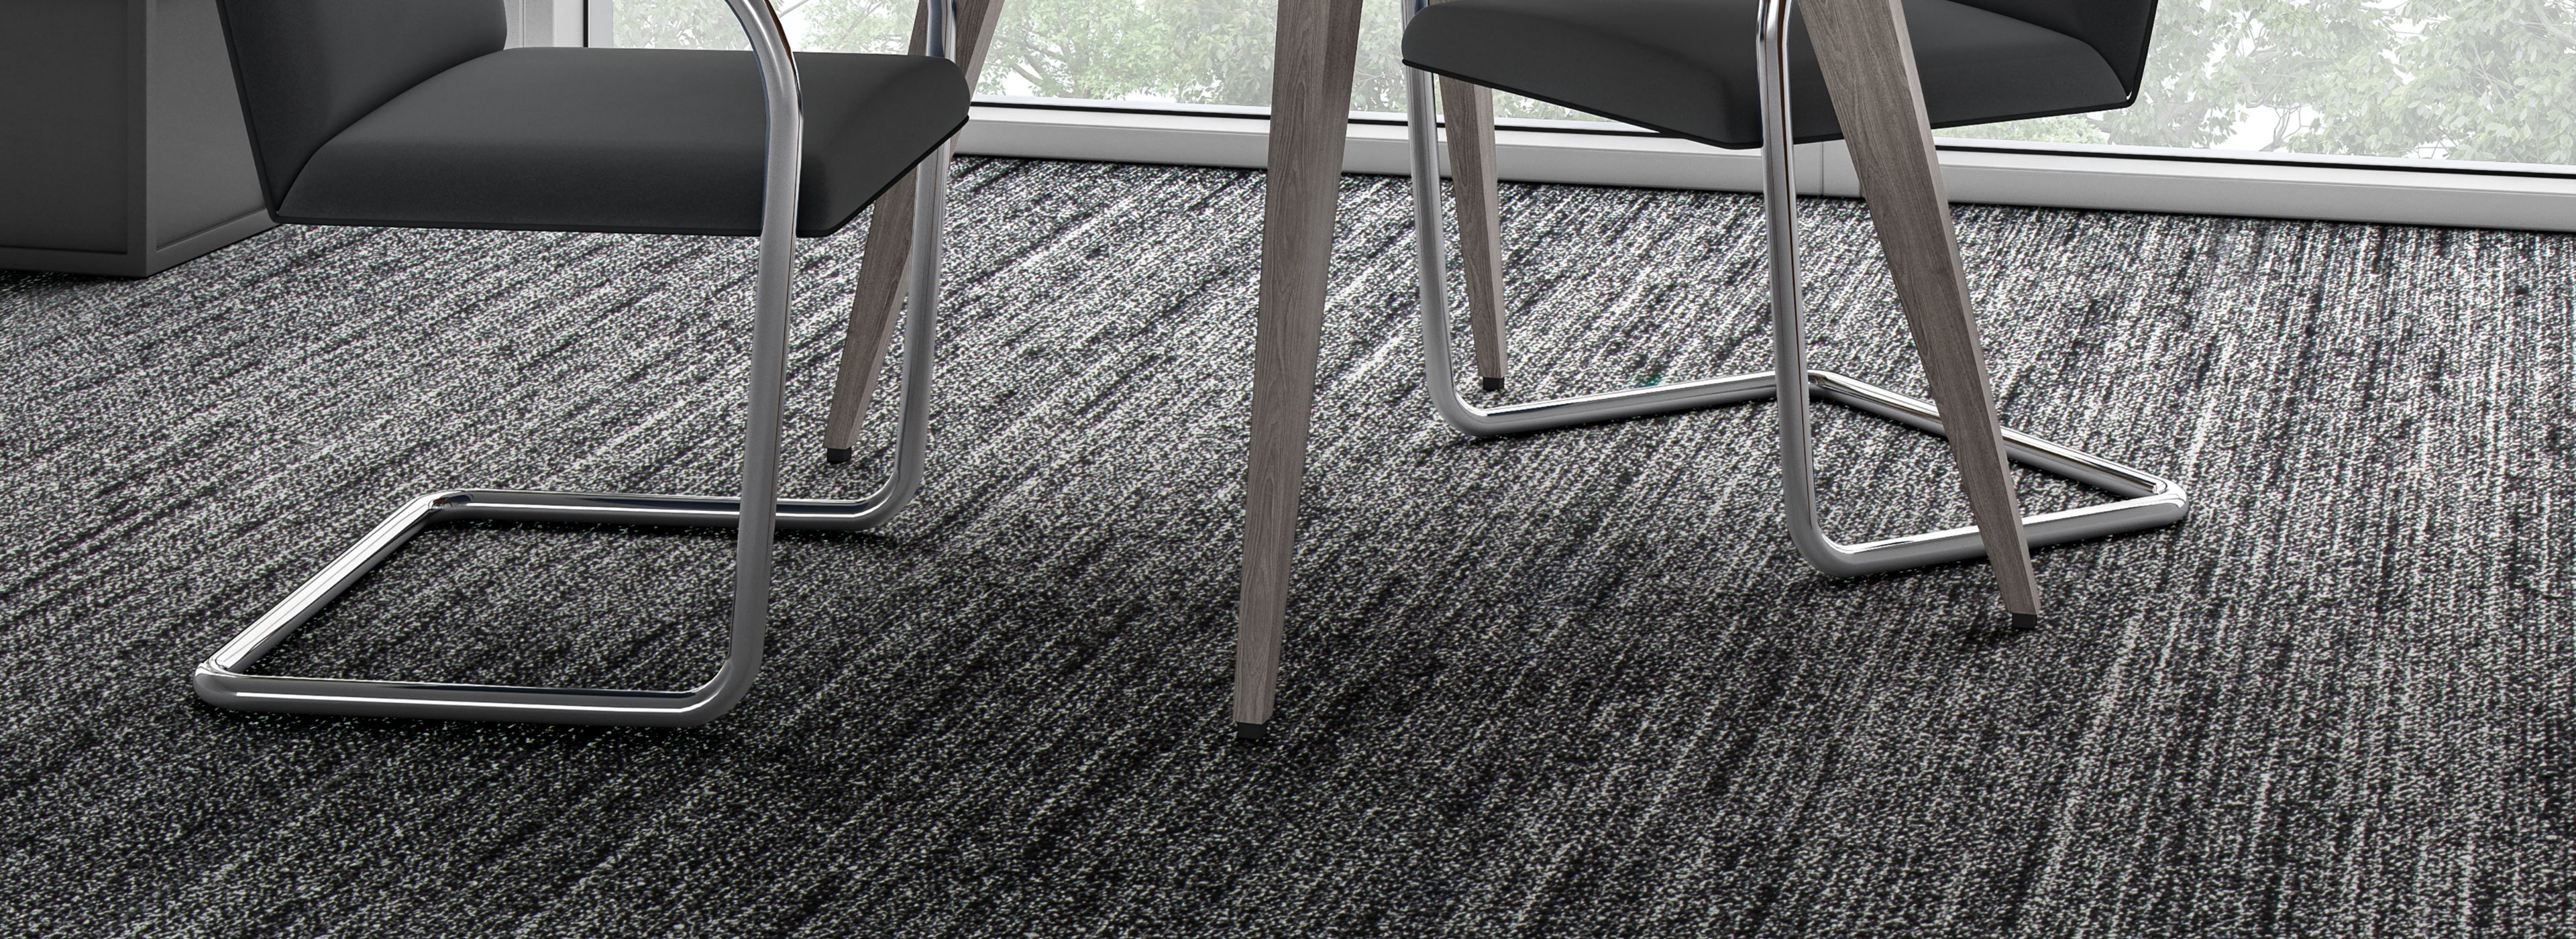 Interface WW870 plank carpet tile shown with small table and chairs número de imagen 1